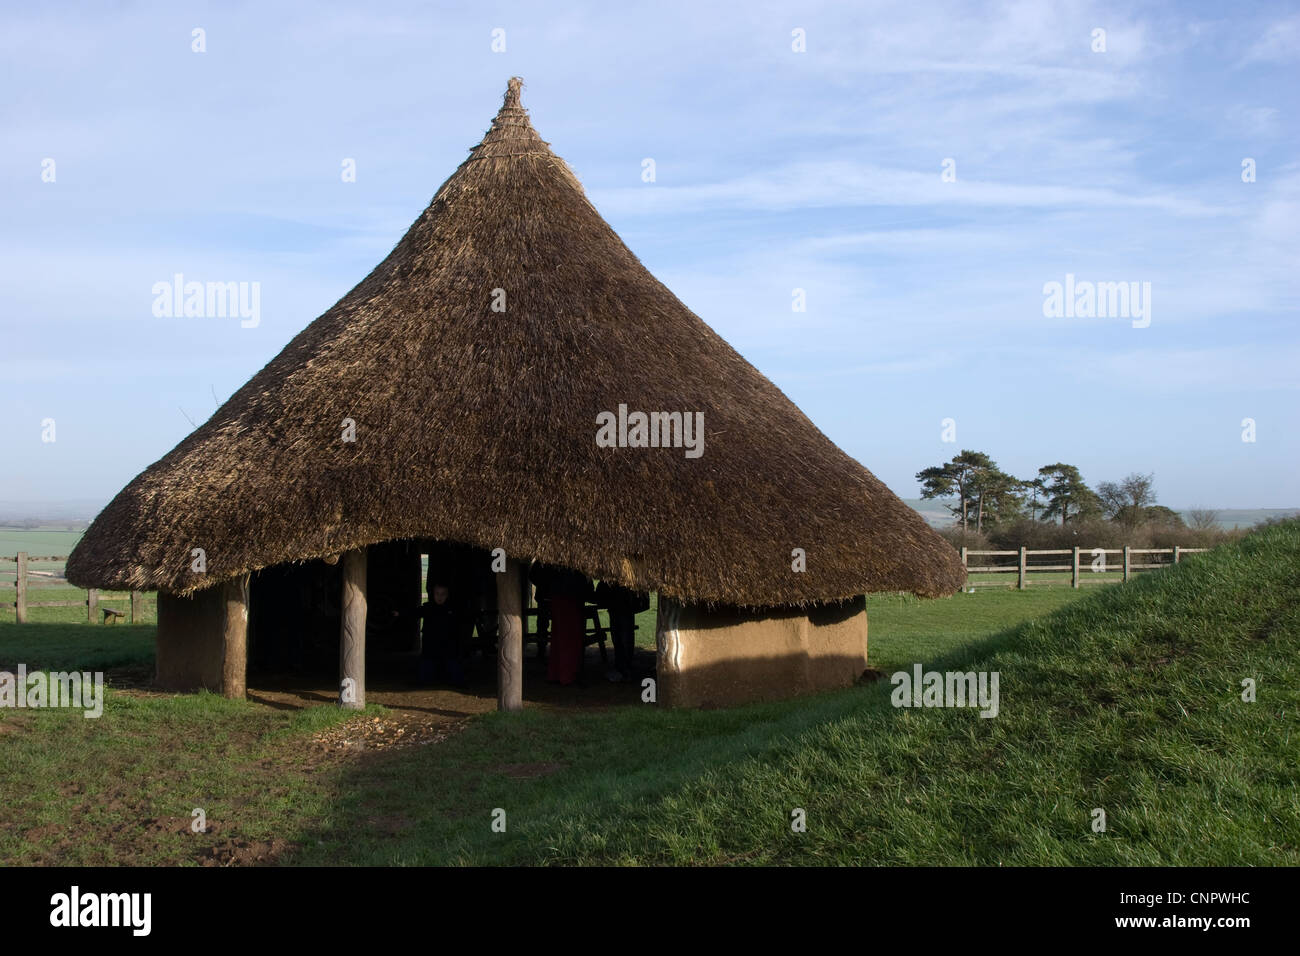 Iron age mud hut roundhouse with mud walls and conical thatched roof Stock Photo